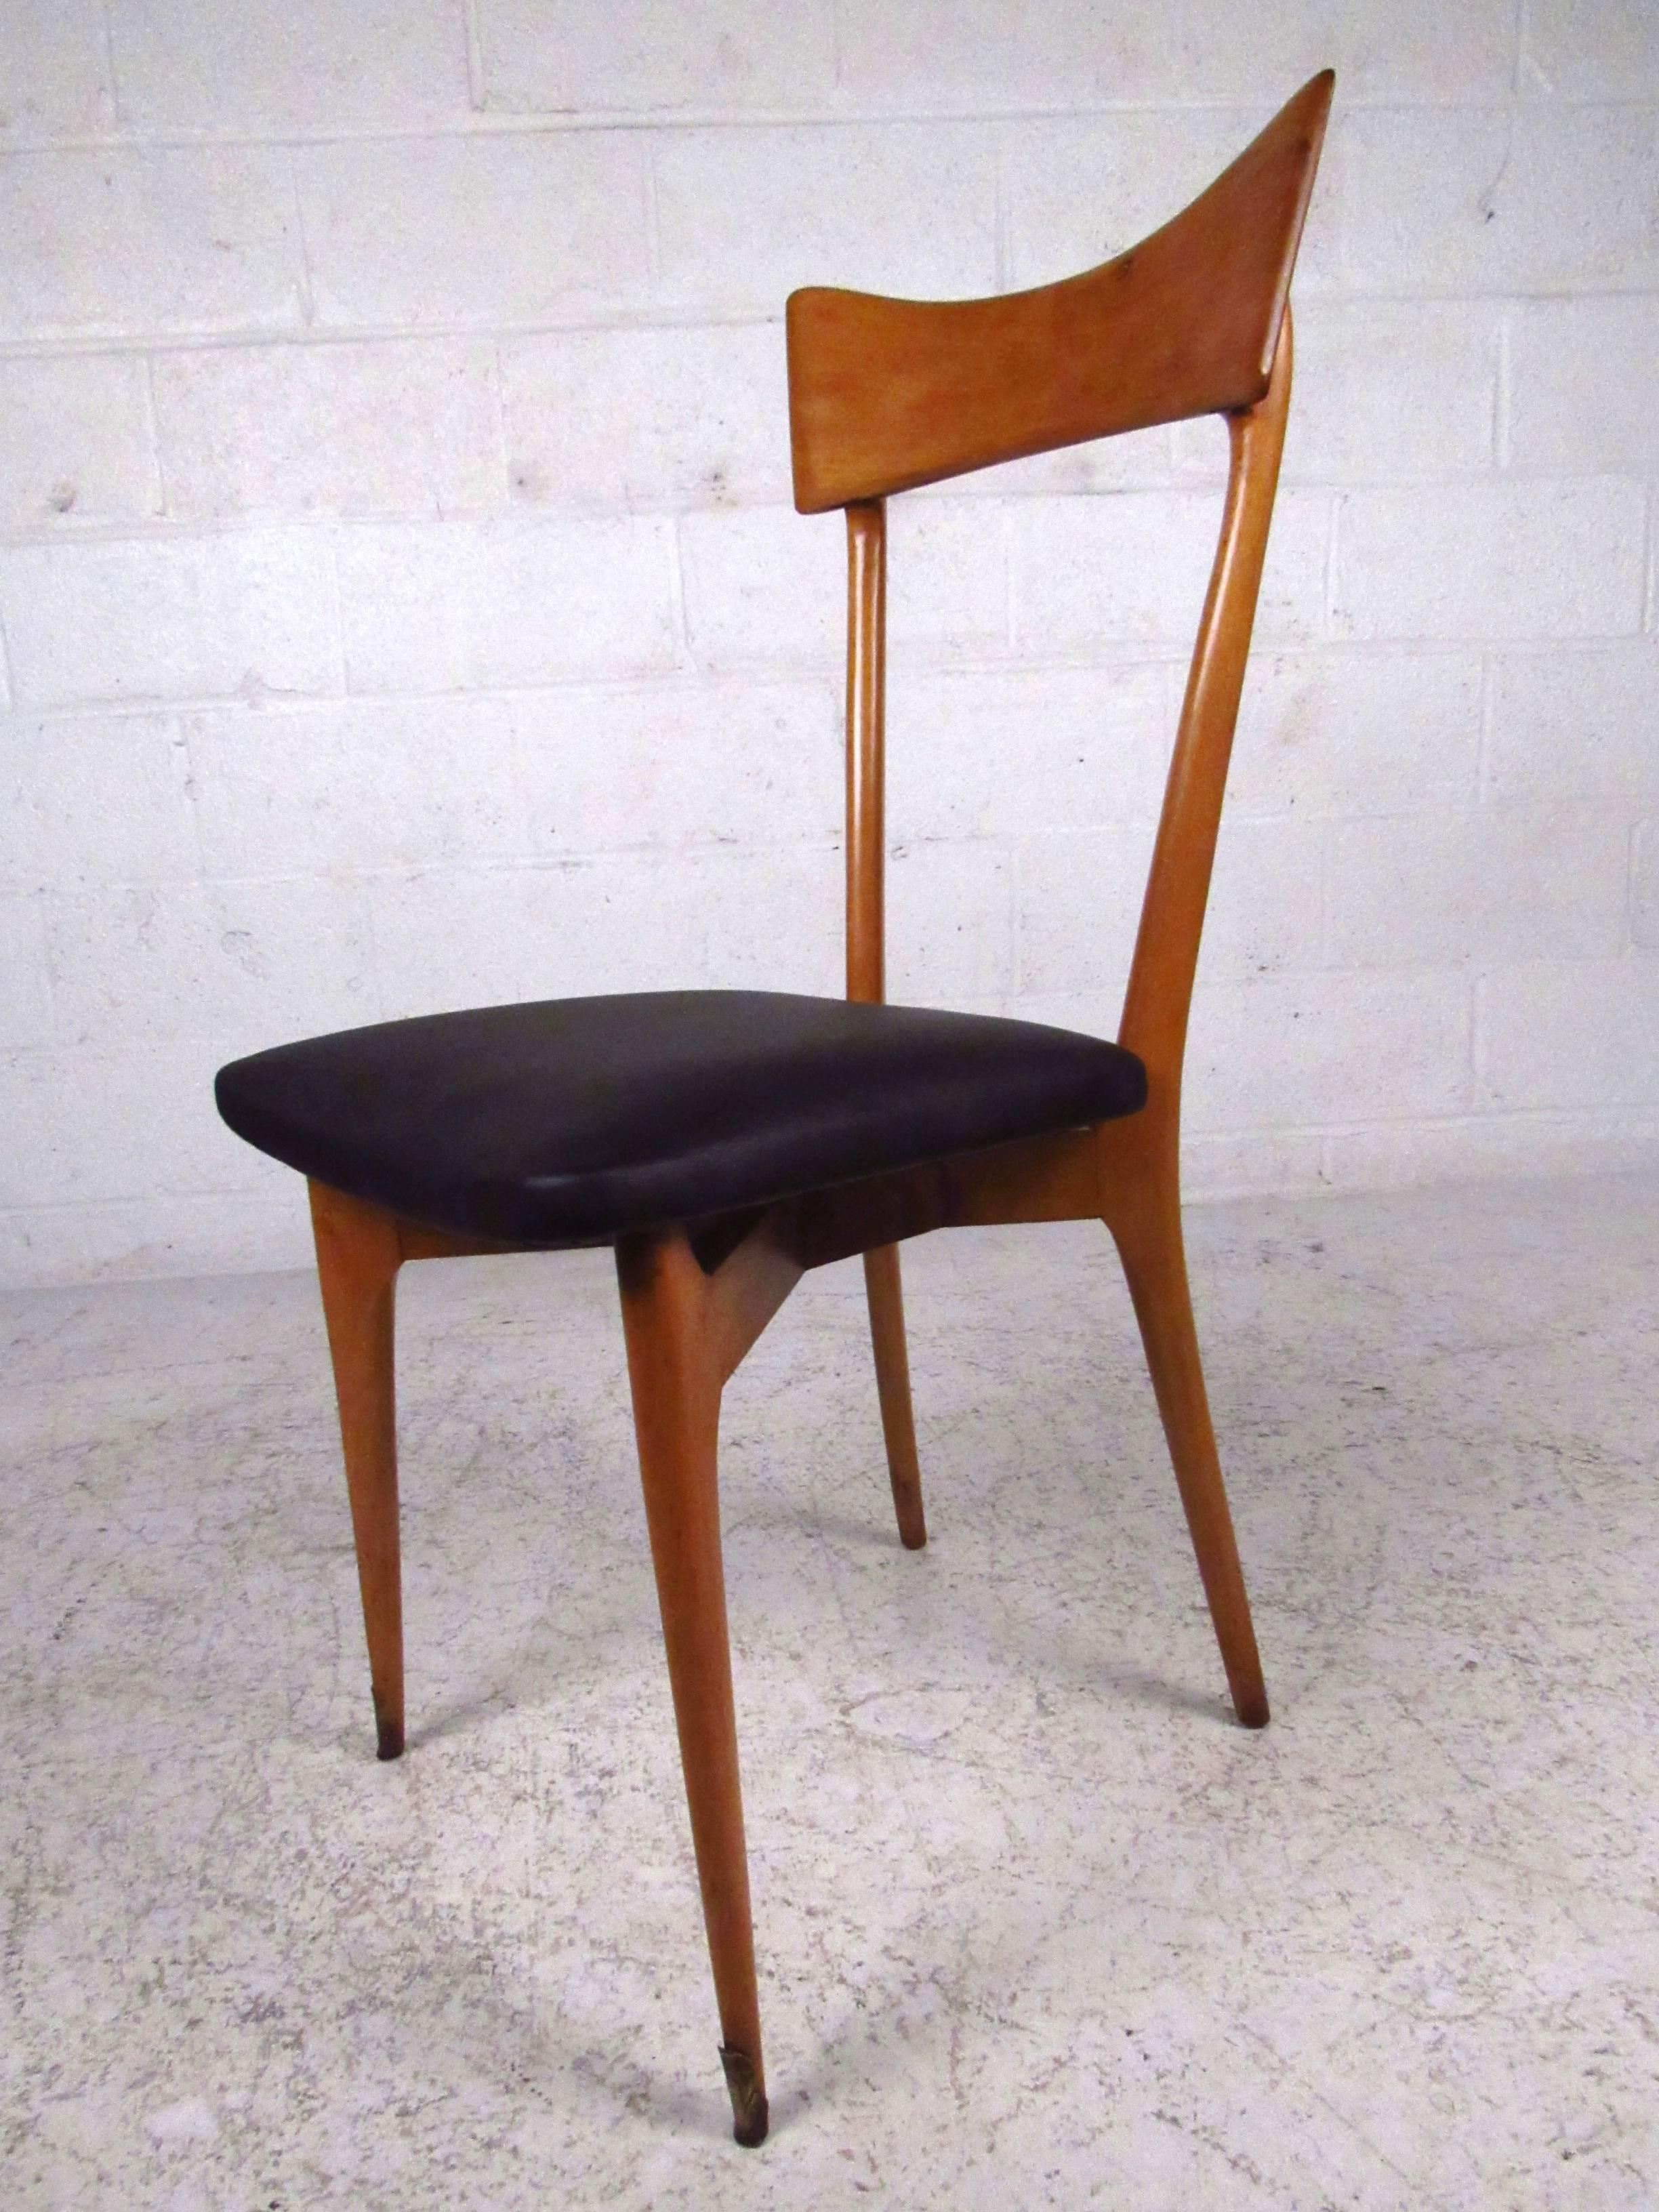 Mid-20th Century Italian Modern Dining Chairs by Ico Parisi